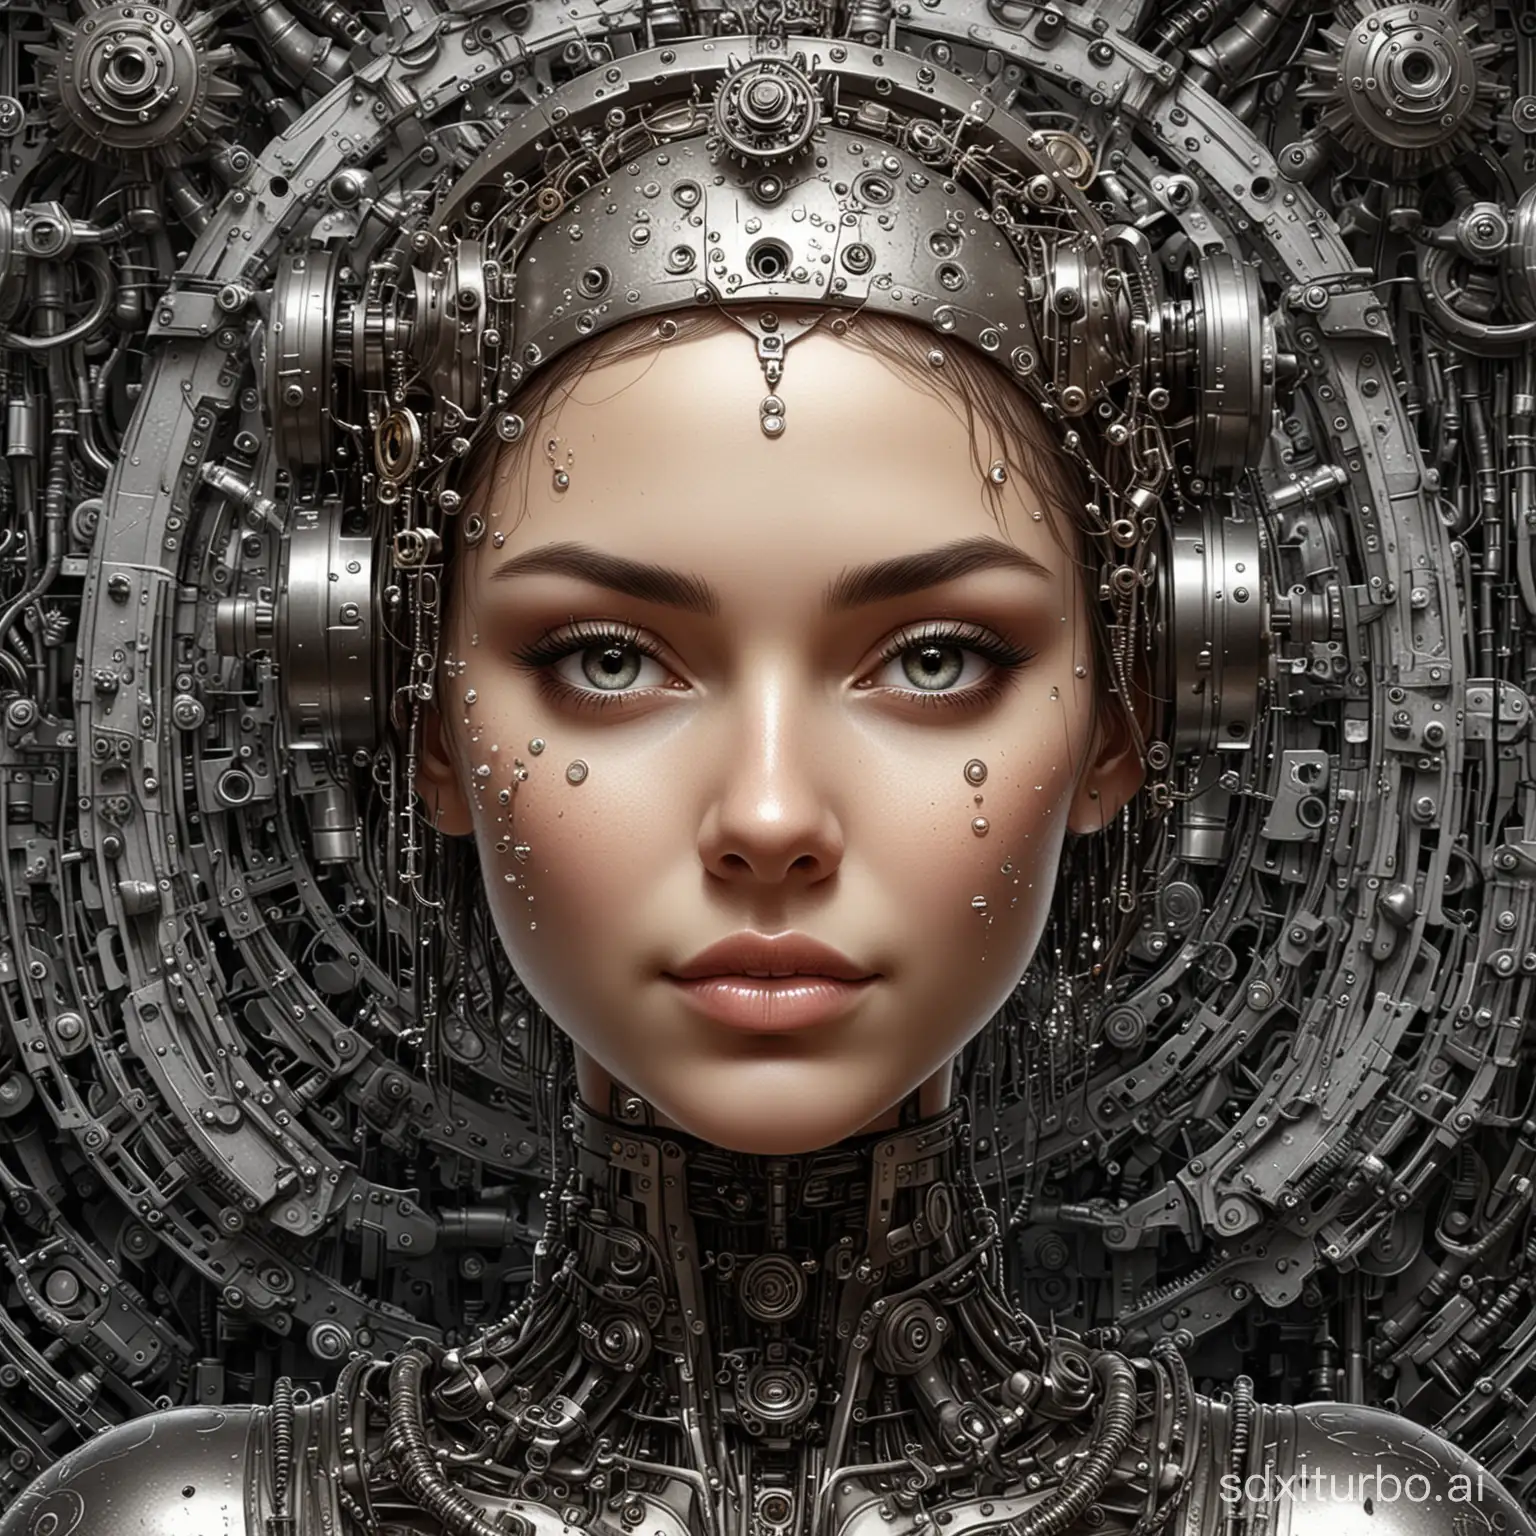 Punk style illustration of handsome girl with metal mechanical decorated human head. Metallic bubbles with gears and ferrofluid. Look ahead and smile with one eye closed, the gorgeous mechanical background. Complex artwork. Fusion of organic and mechanical elements, Art Nouveau, detailed, intricate, dark themes, calm, confident, handsome, fair skin.